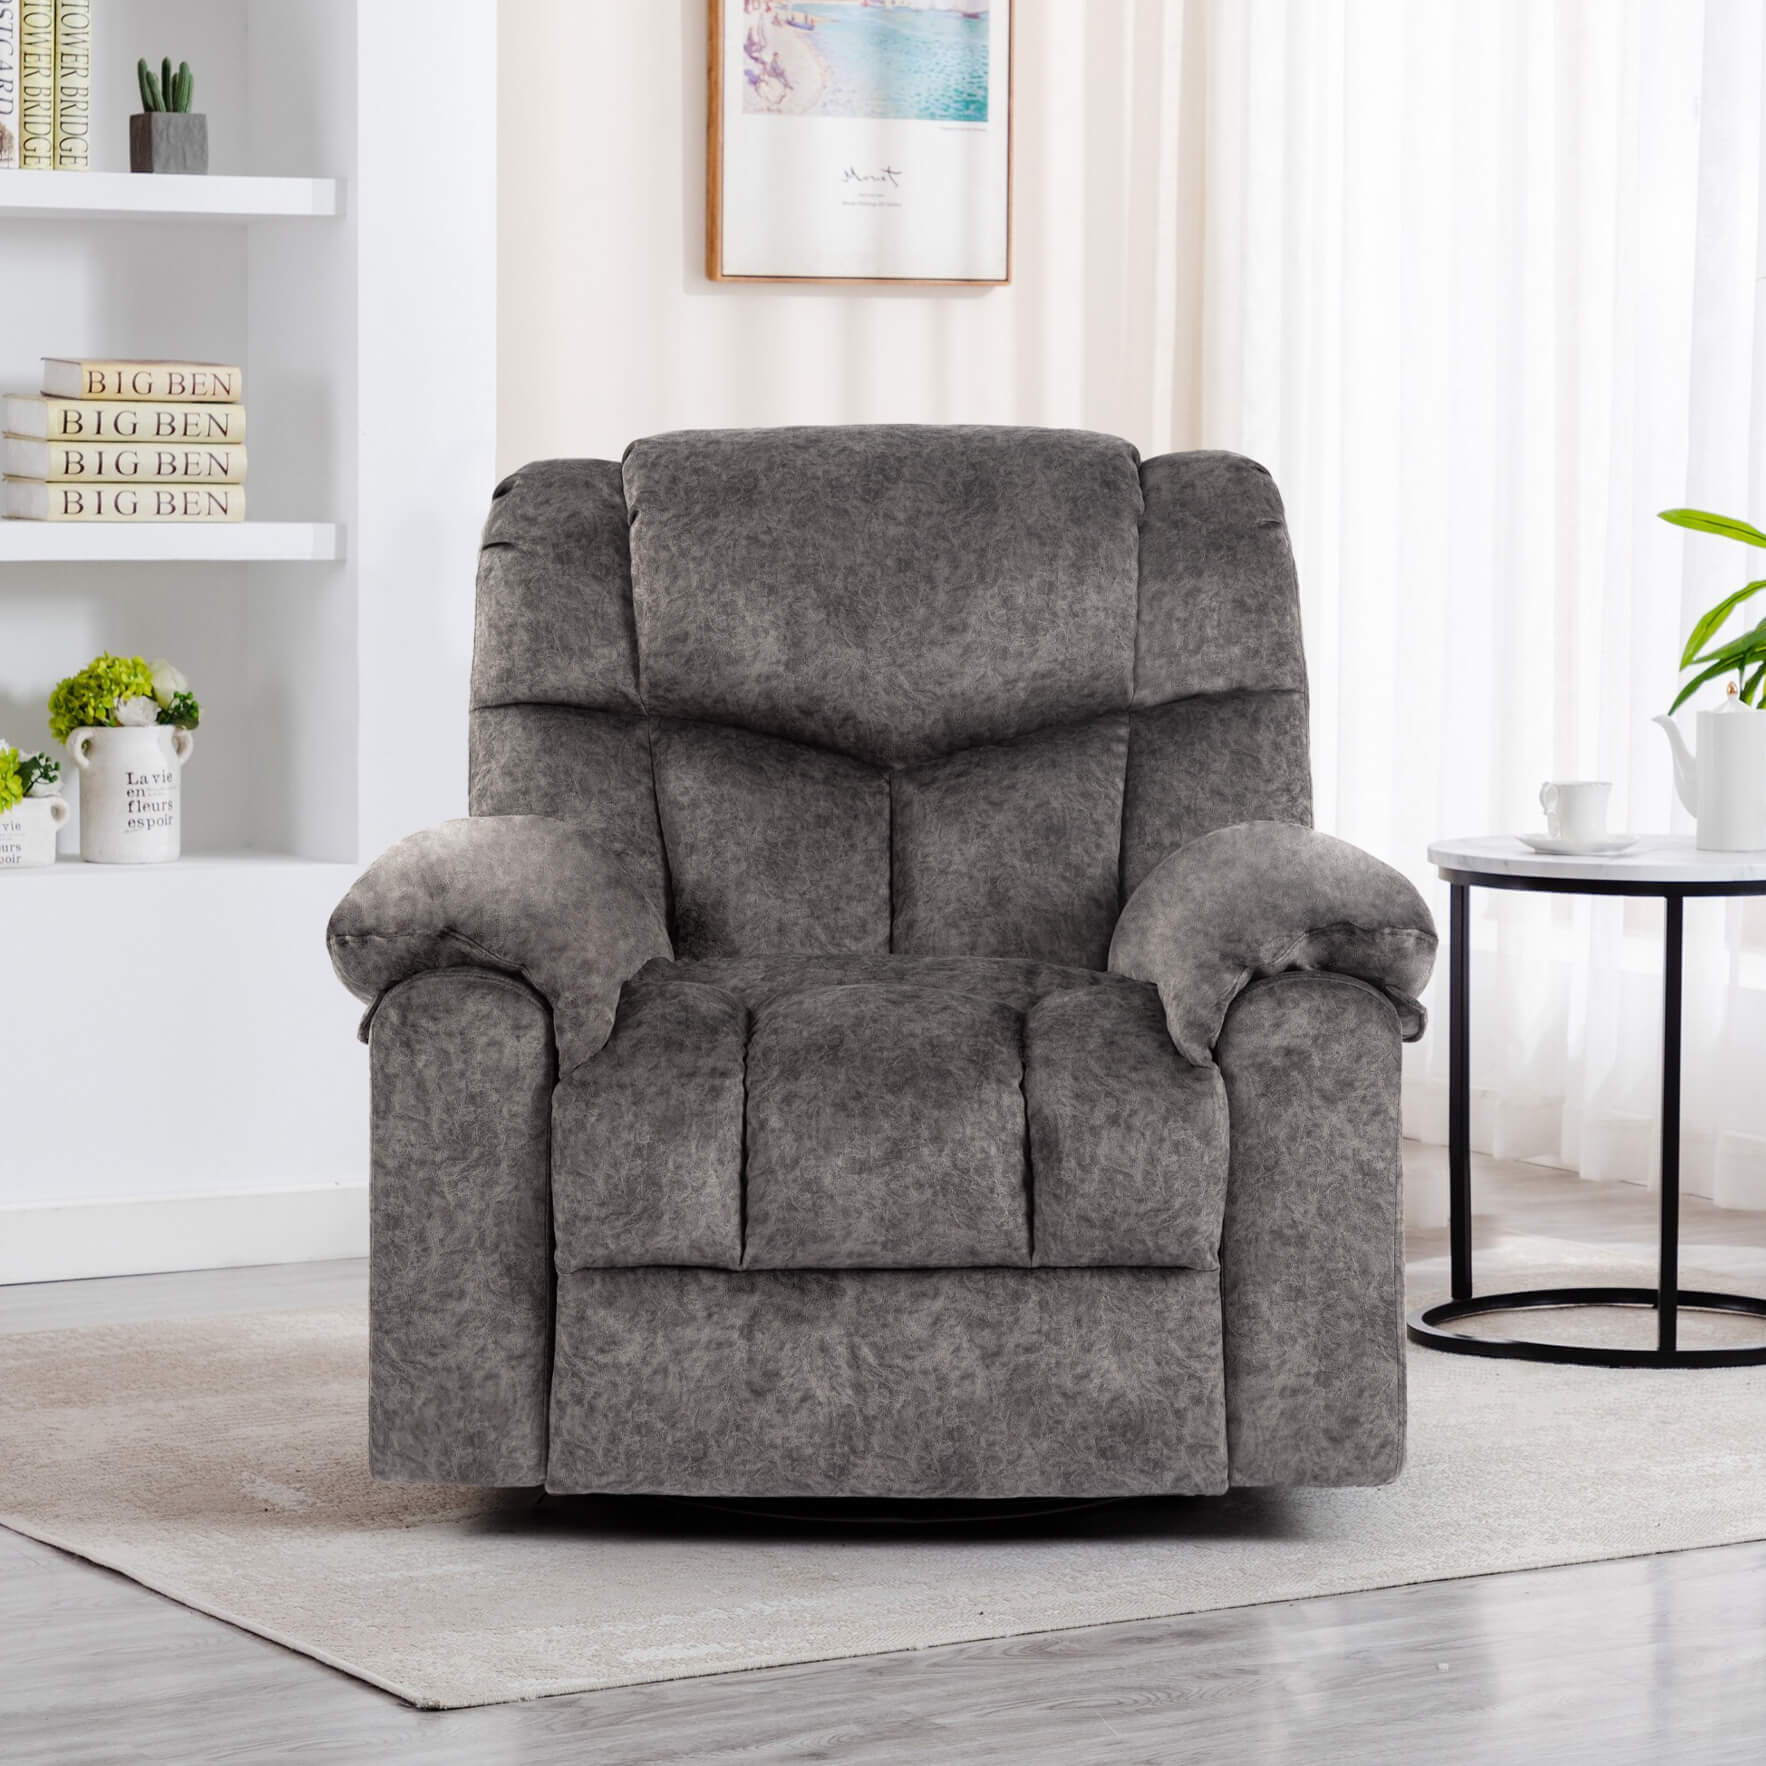 Canapé inclinable 9020-gris